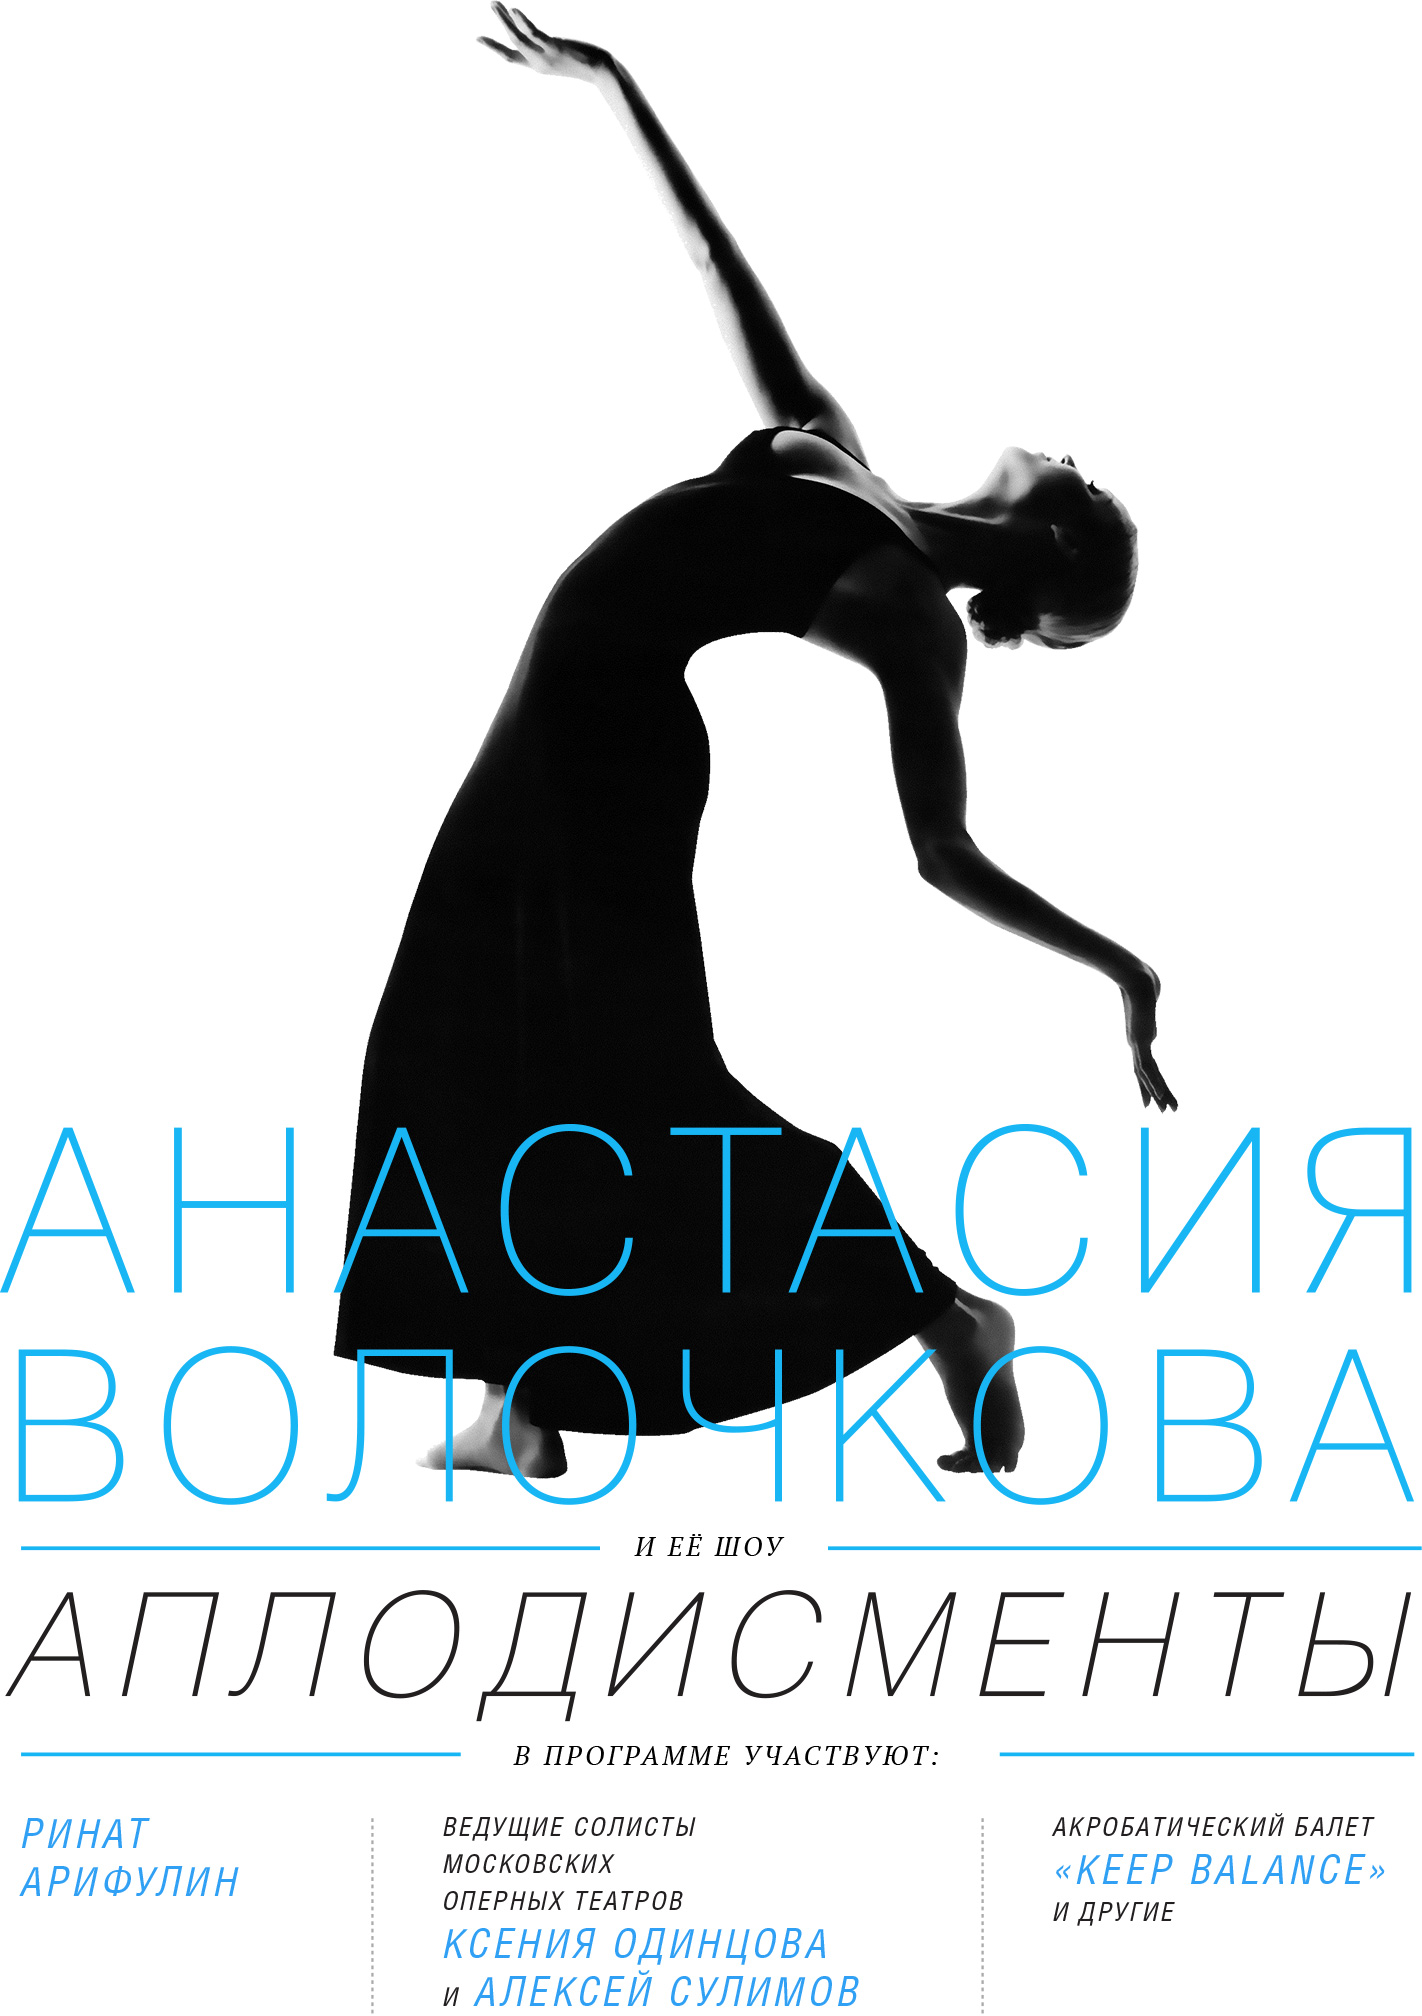 anastasiya volochkova poster close-up in the graphical style of the upcoming graceful perfomances